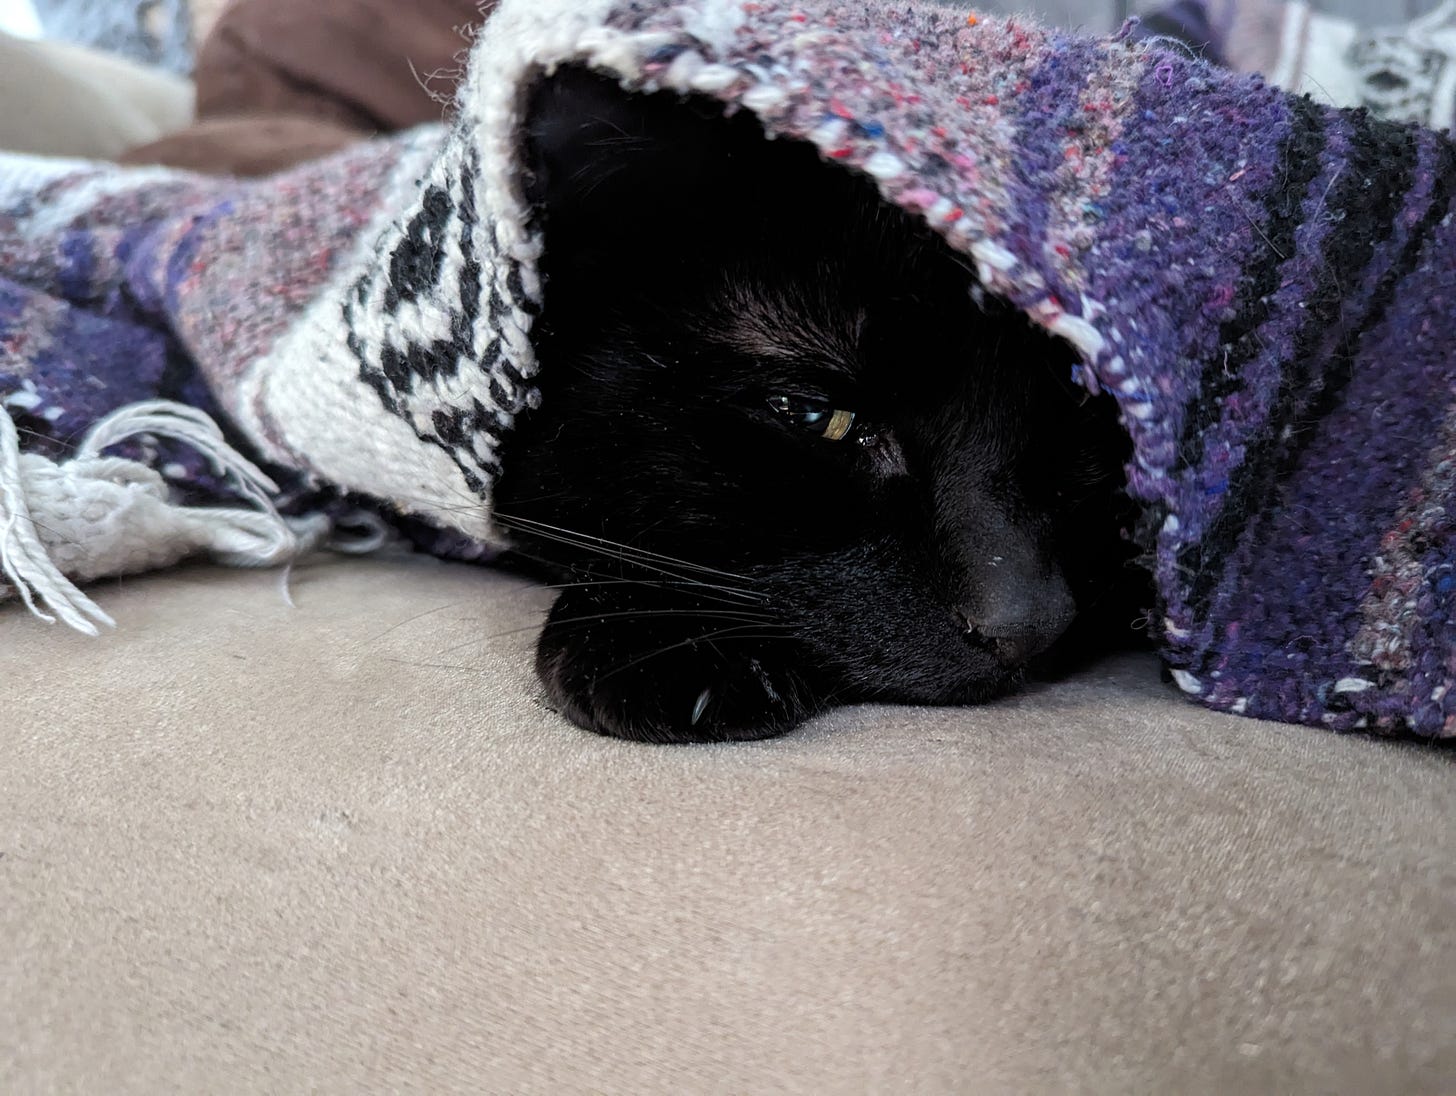 A black cat peers side-eyes the camera from under a purple-striped blanket, half his face visible and resting on his paw.